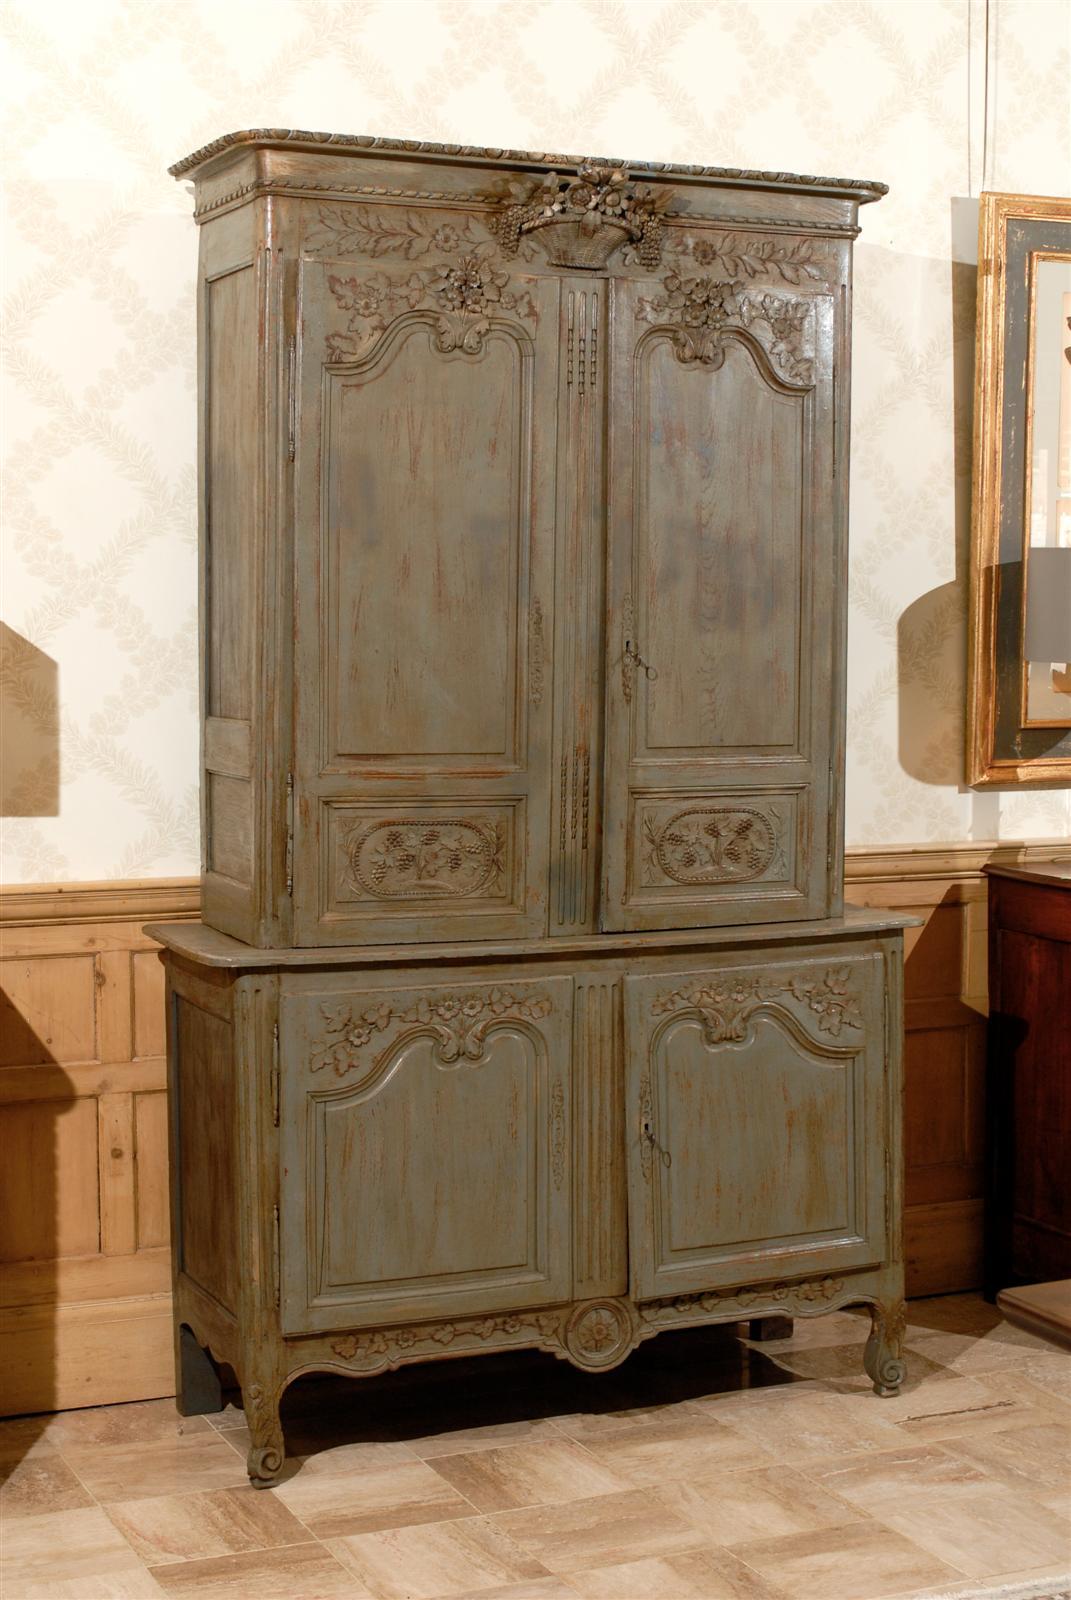 A recently added coat of paint has updated this stately buffet to make it a perfect fit for today's decor. The intricate carving of grapes and basket of flowers, very typical of pieces from Normandy was clearly done by a skilled carver. Some of the